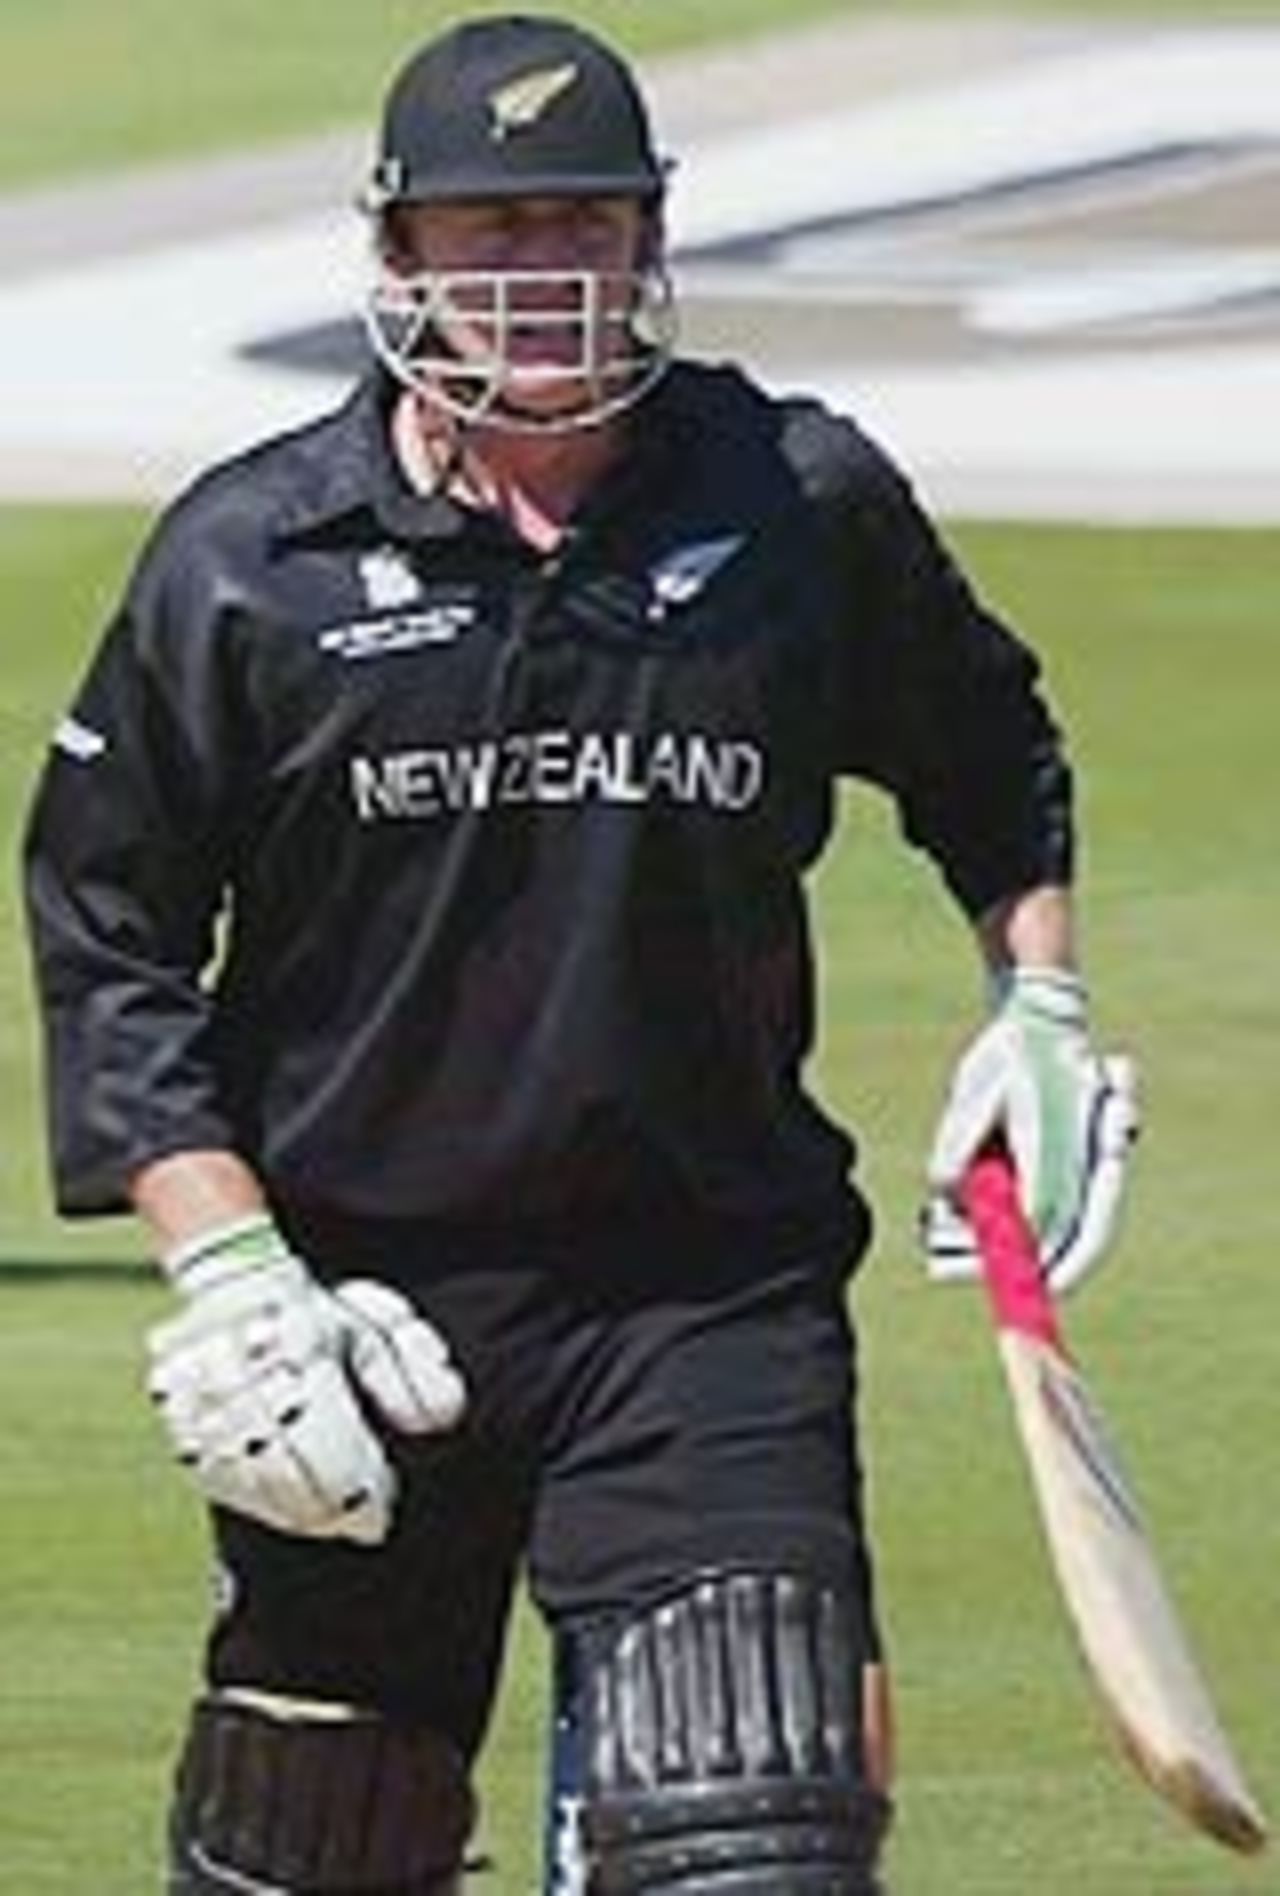 Scott Styris looks disappointed at getting out, New Zealand v India, 2003 World Cup, Centurian, March 14, 2003